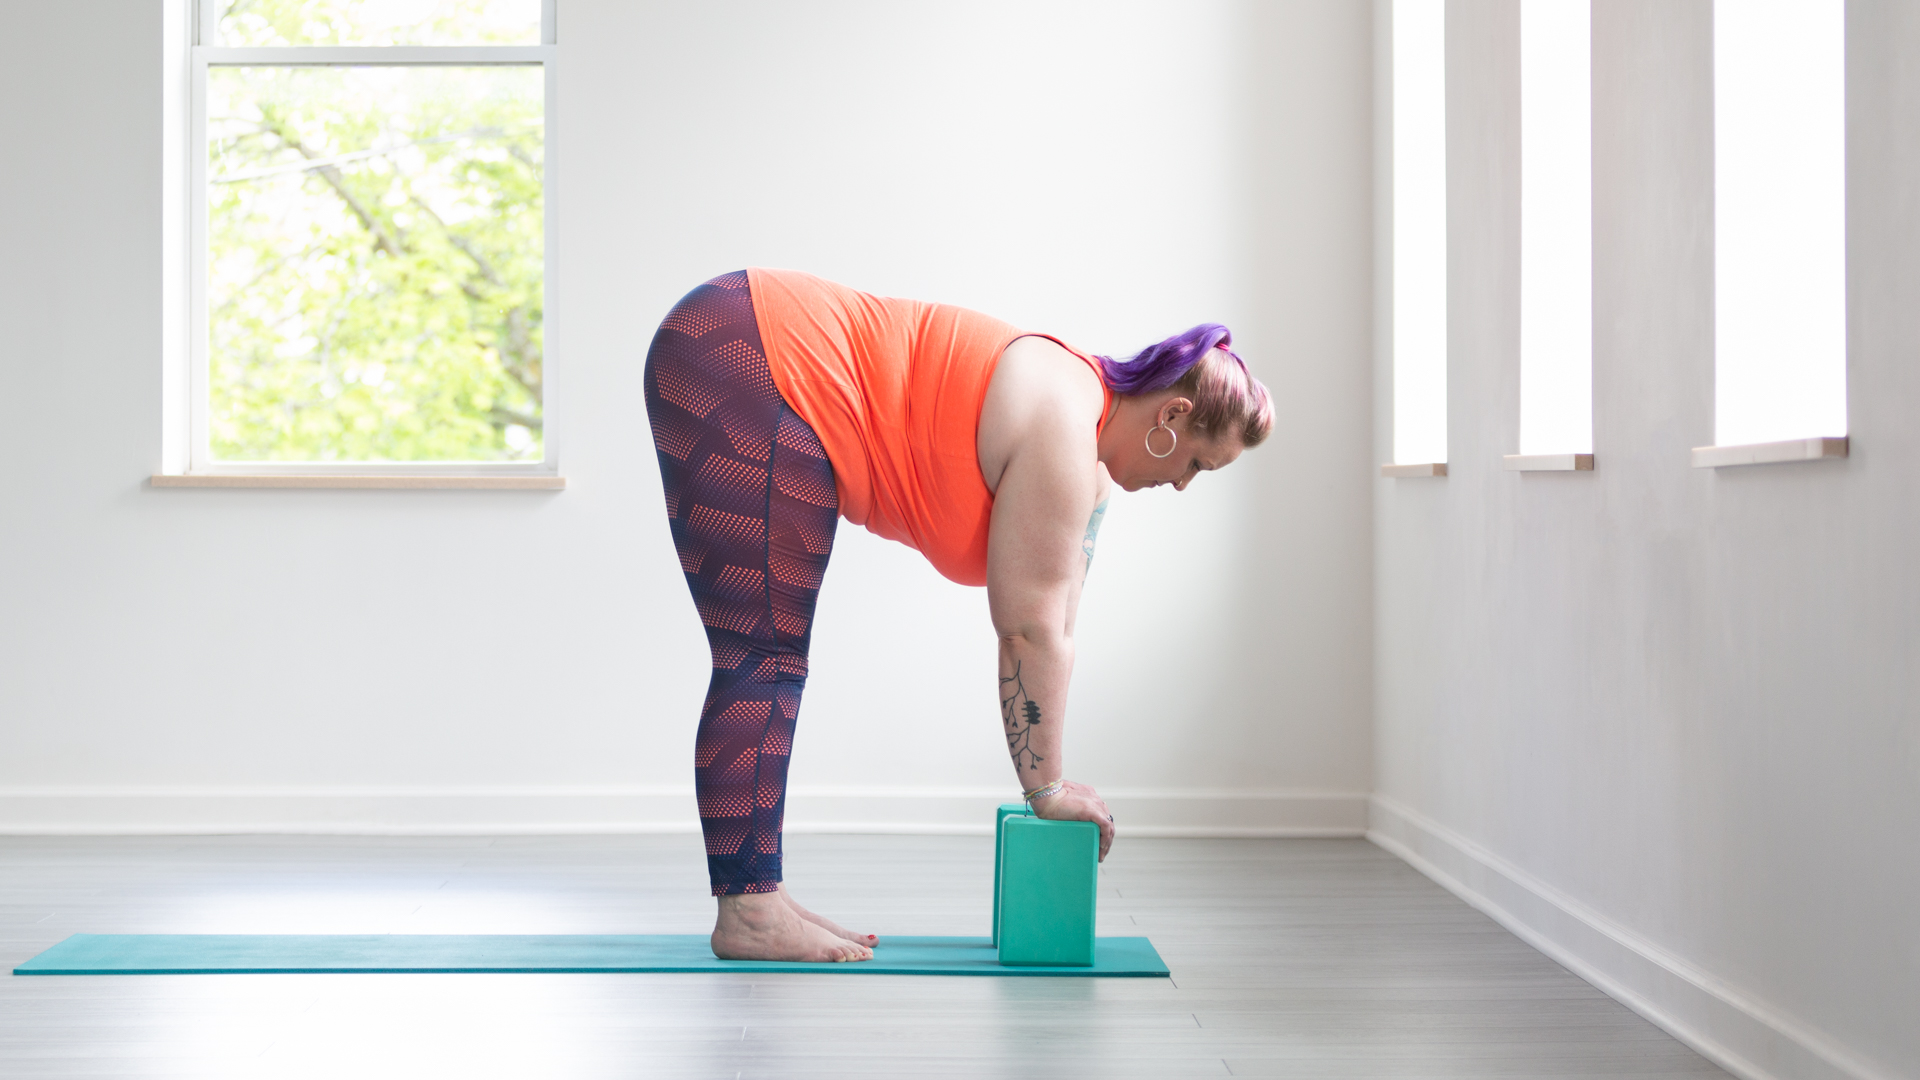 3 Beginner Yoga Poses for Lower Back Pain Relief | Spine-health